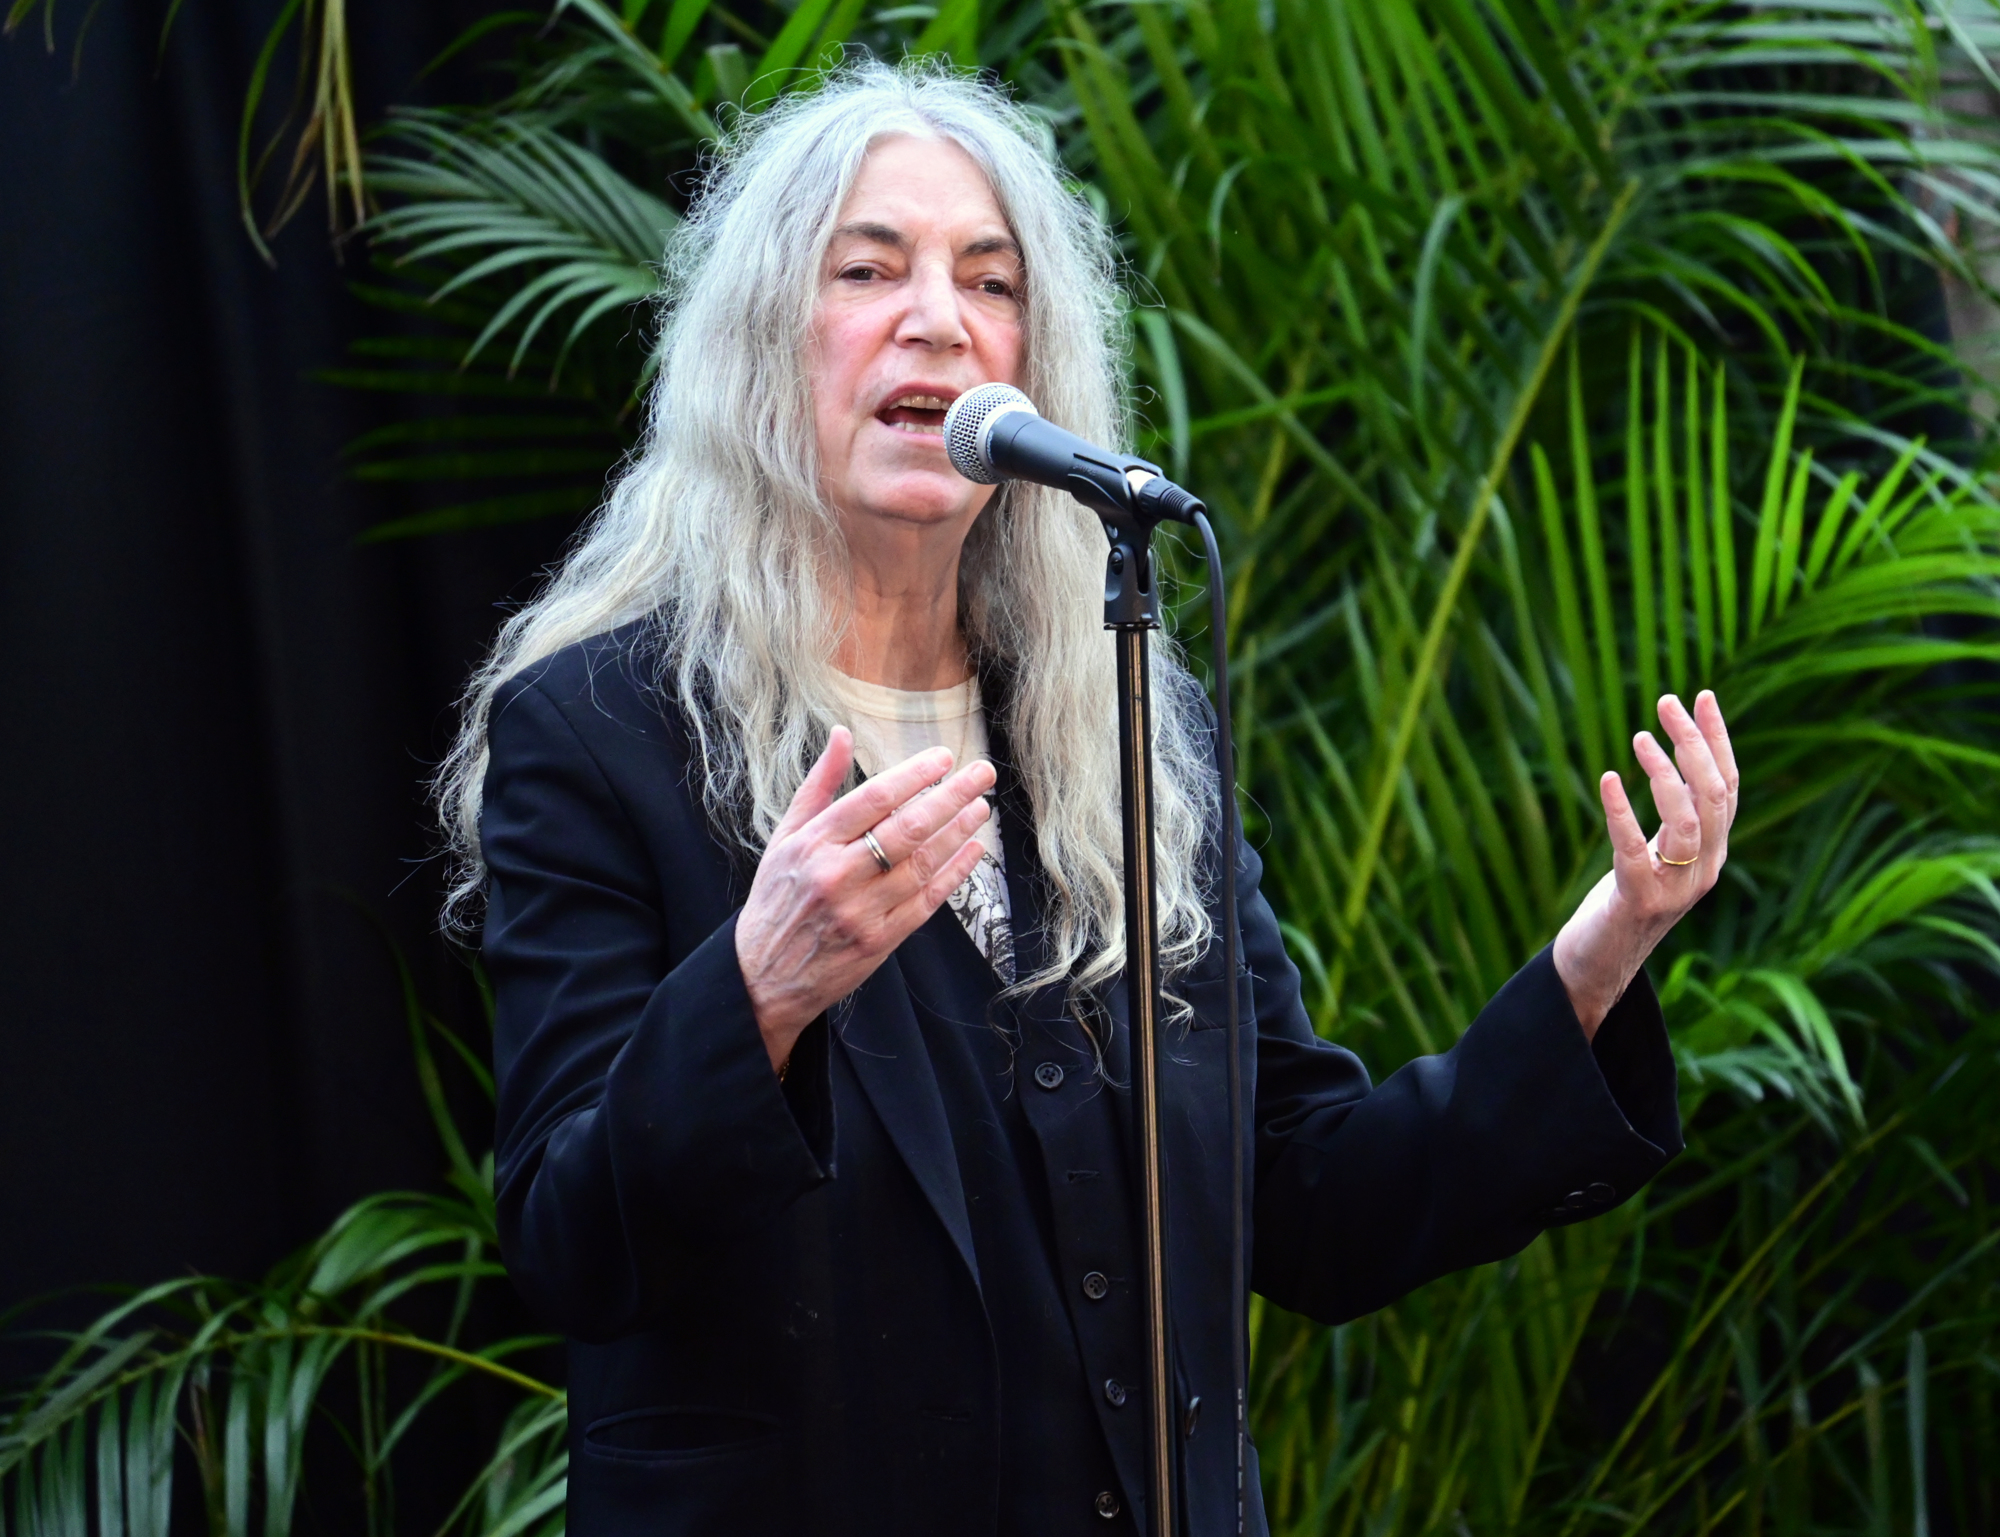 Patti Smith closed out her set with a rendition of 